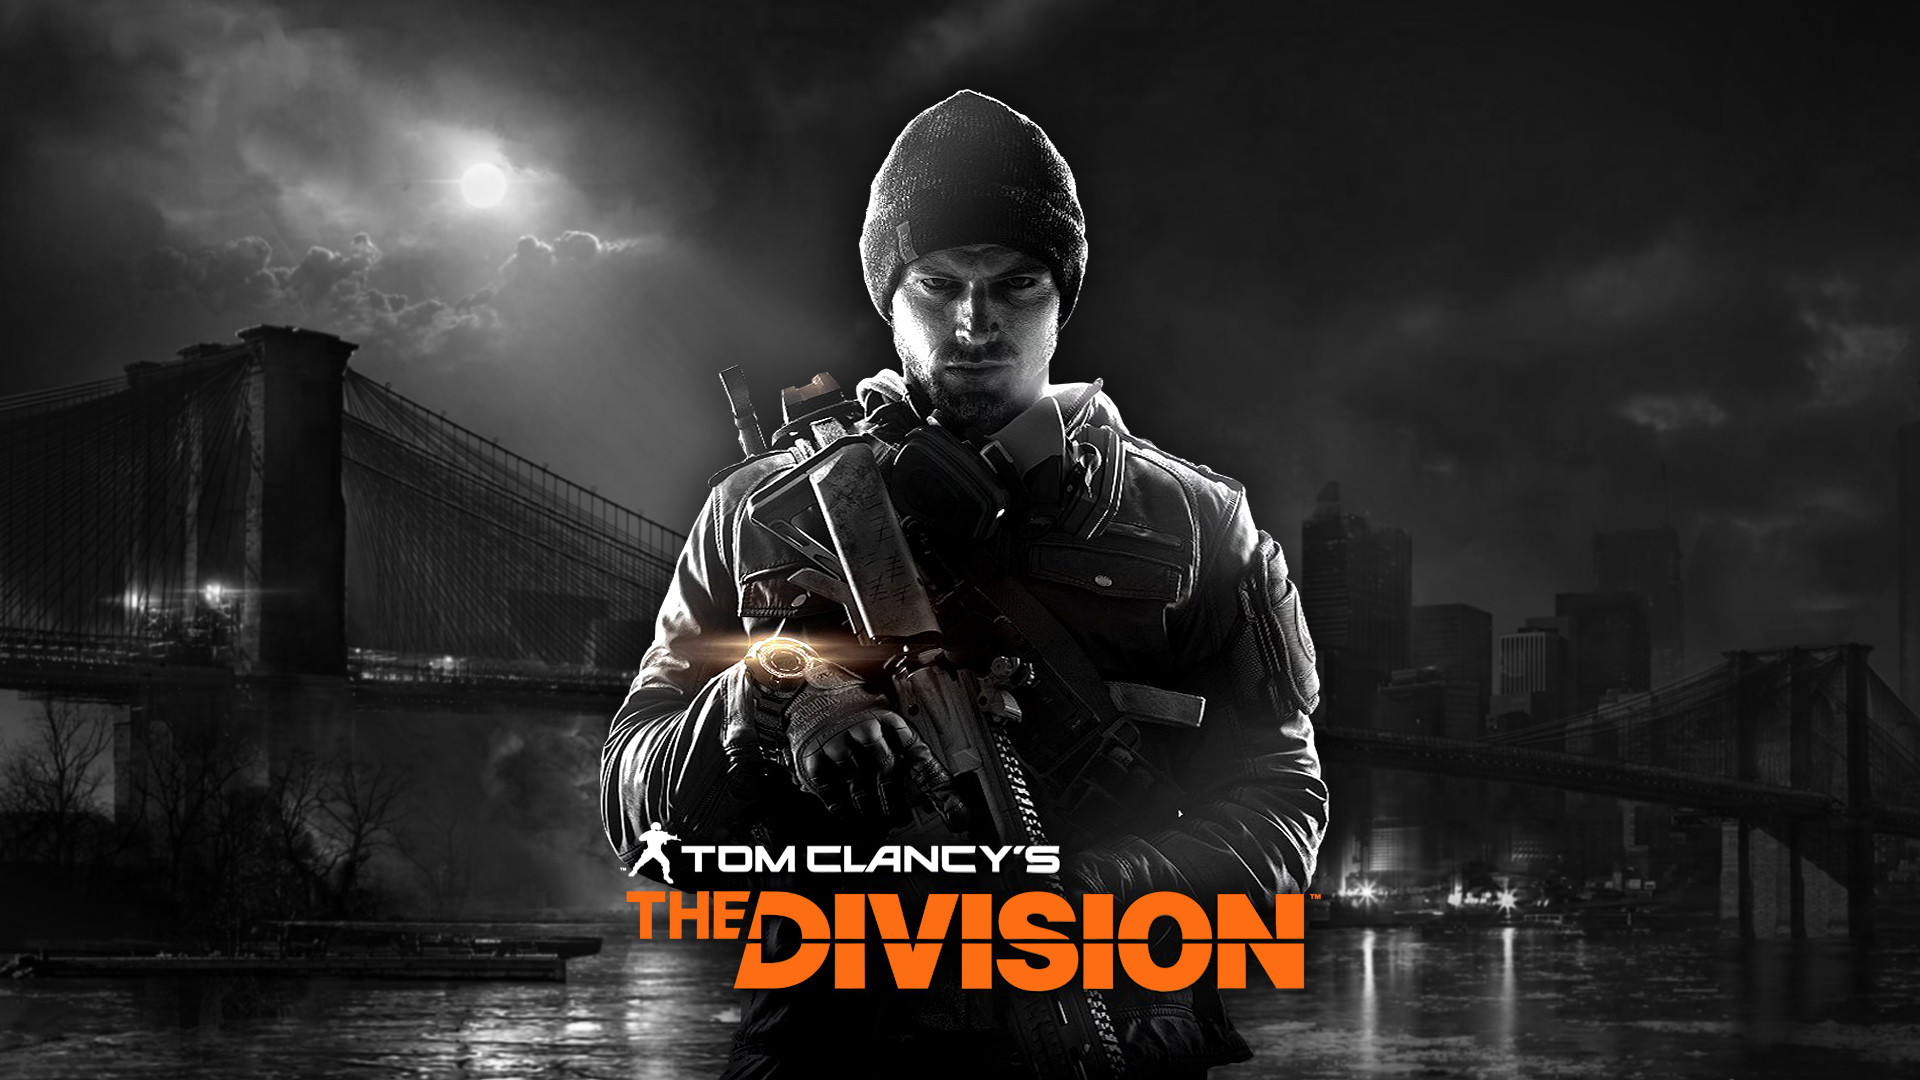 The Division Full HD Wallpaper 1920×1080